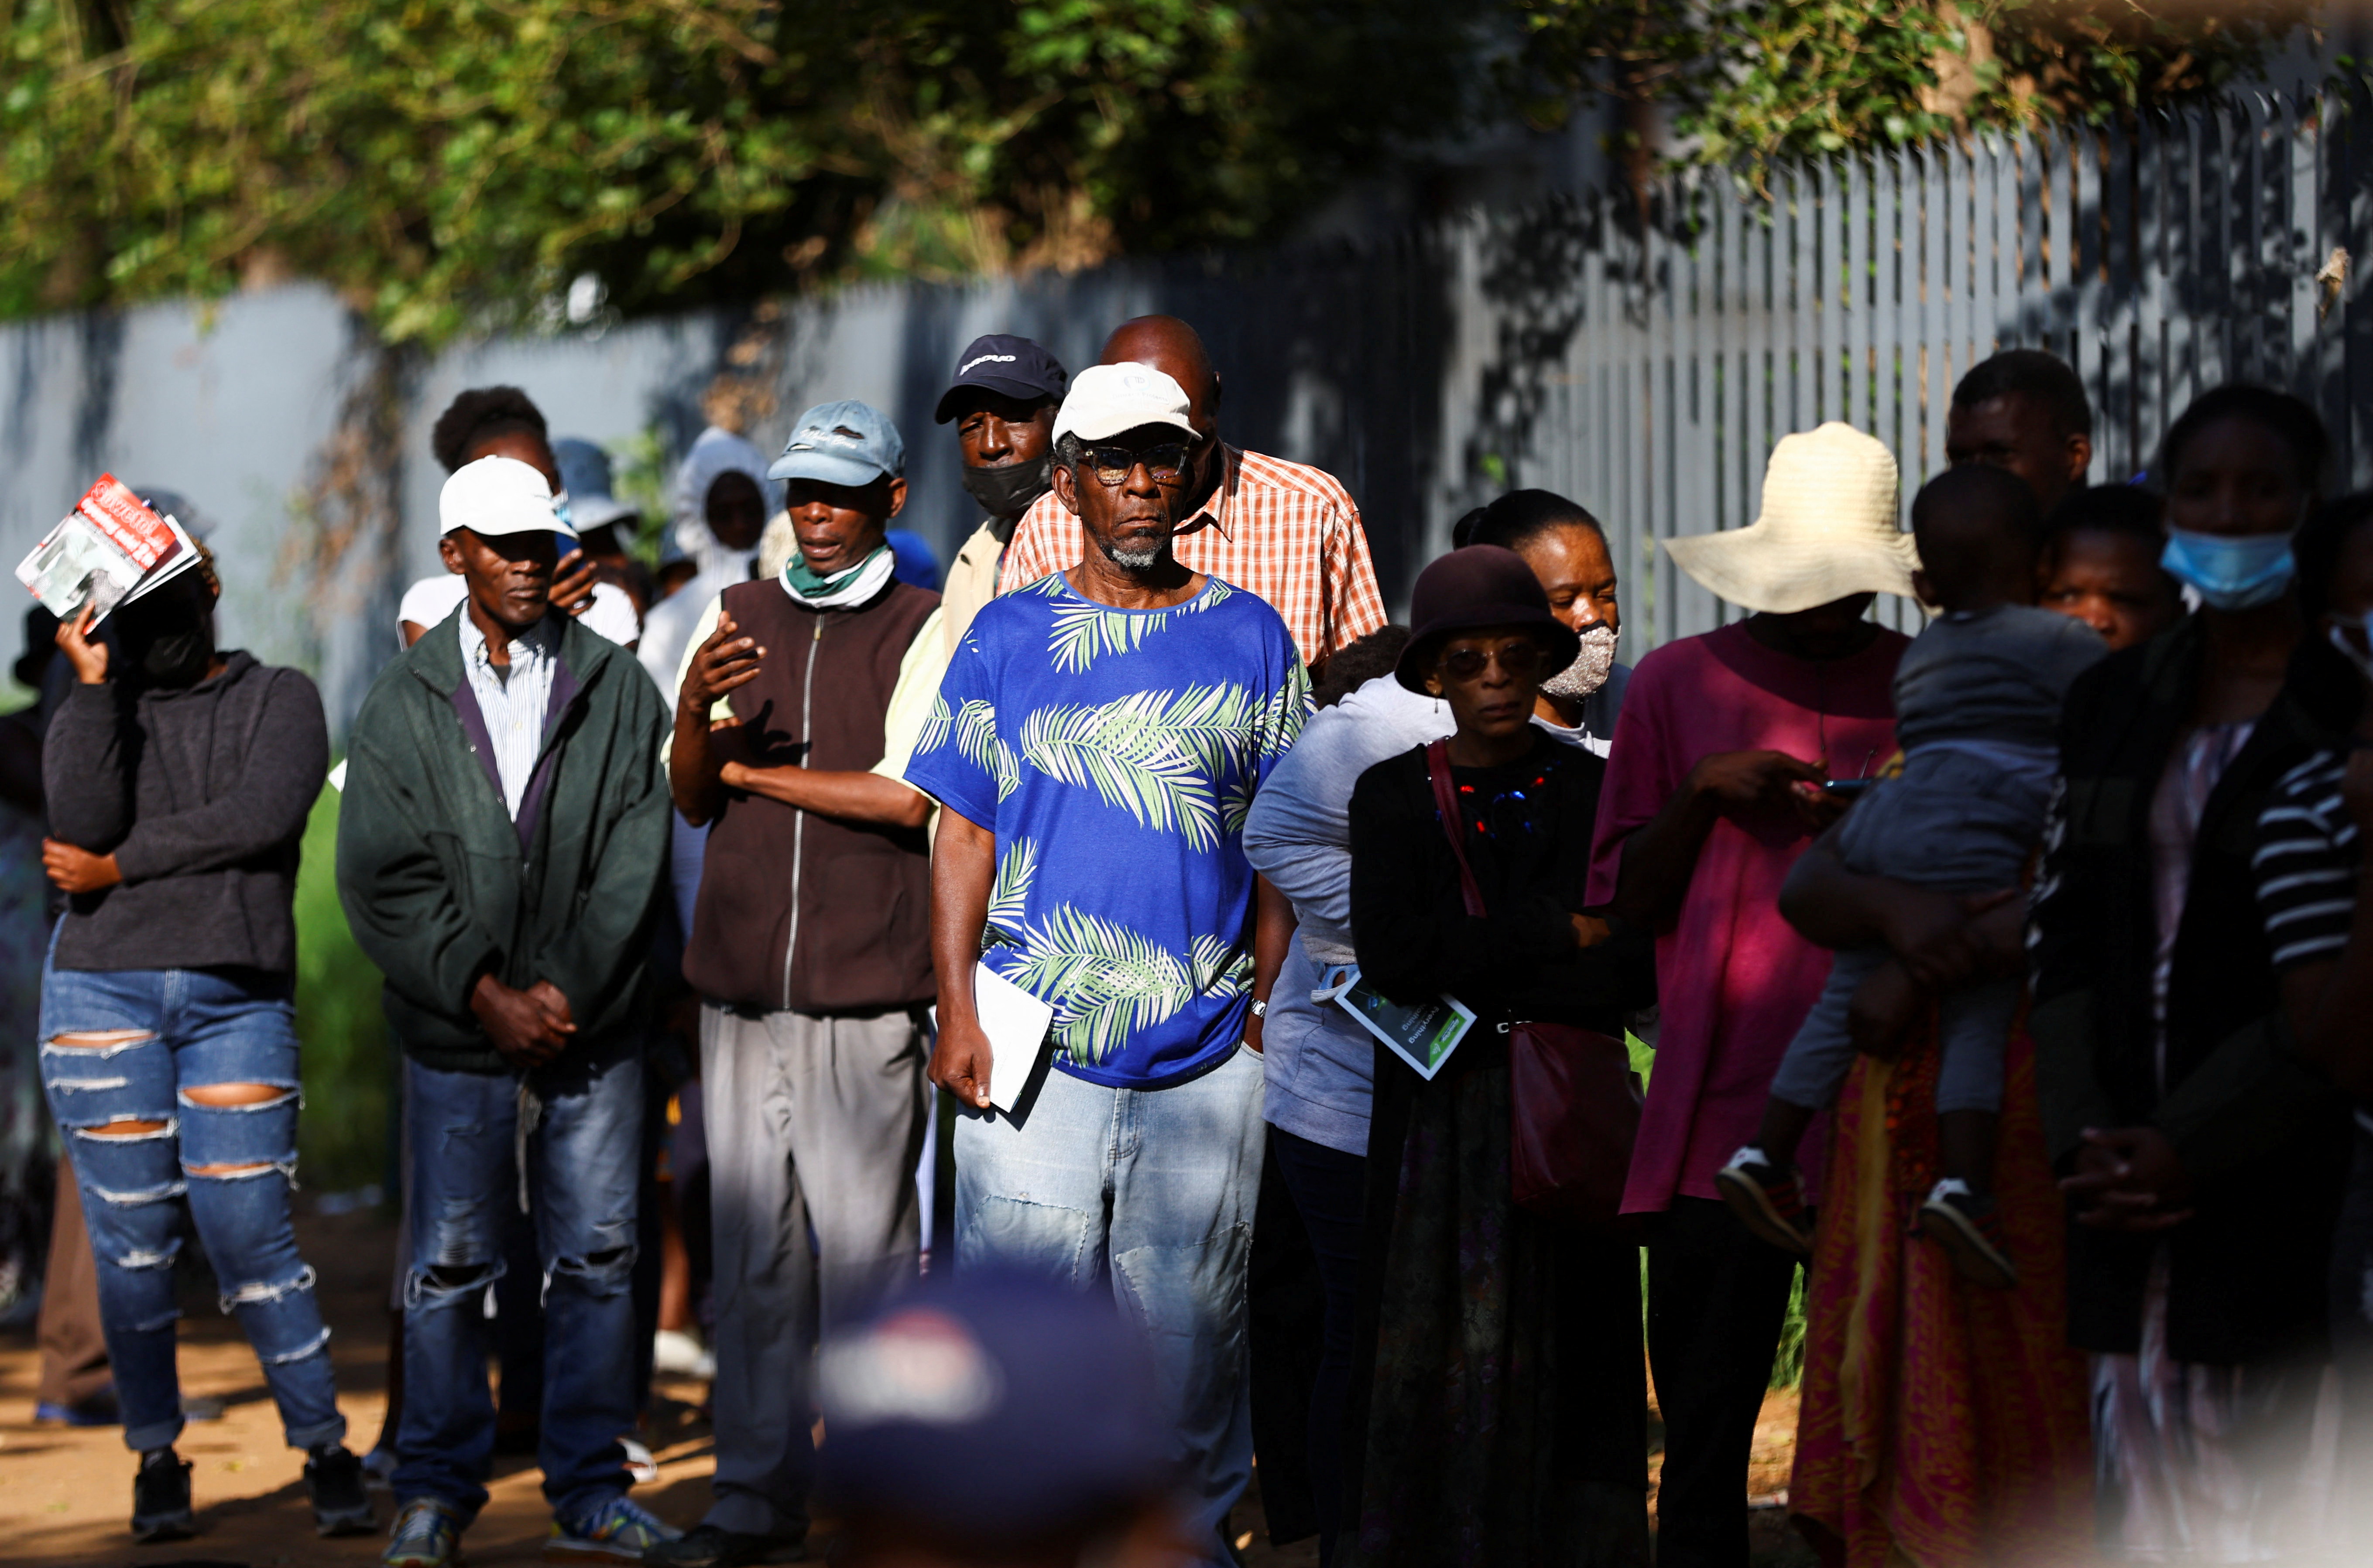 South Africa wrestles on takling poverty and inequality as joblessness takes toll